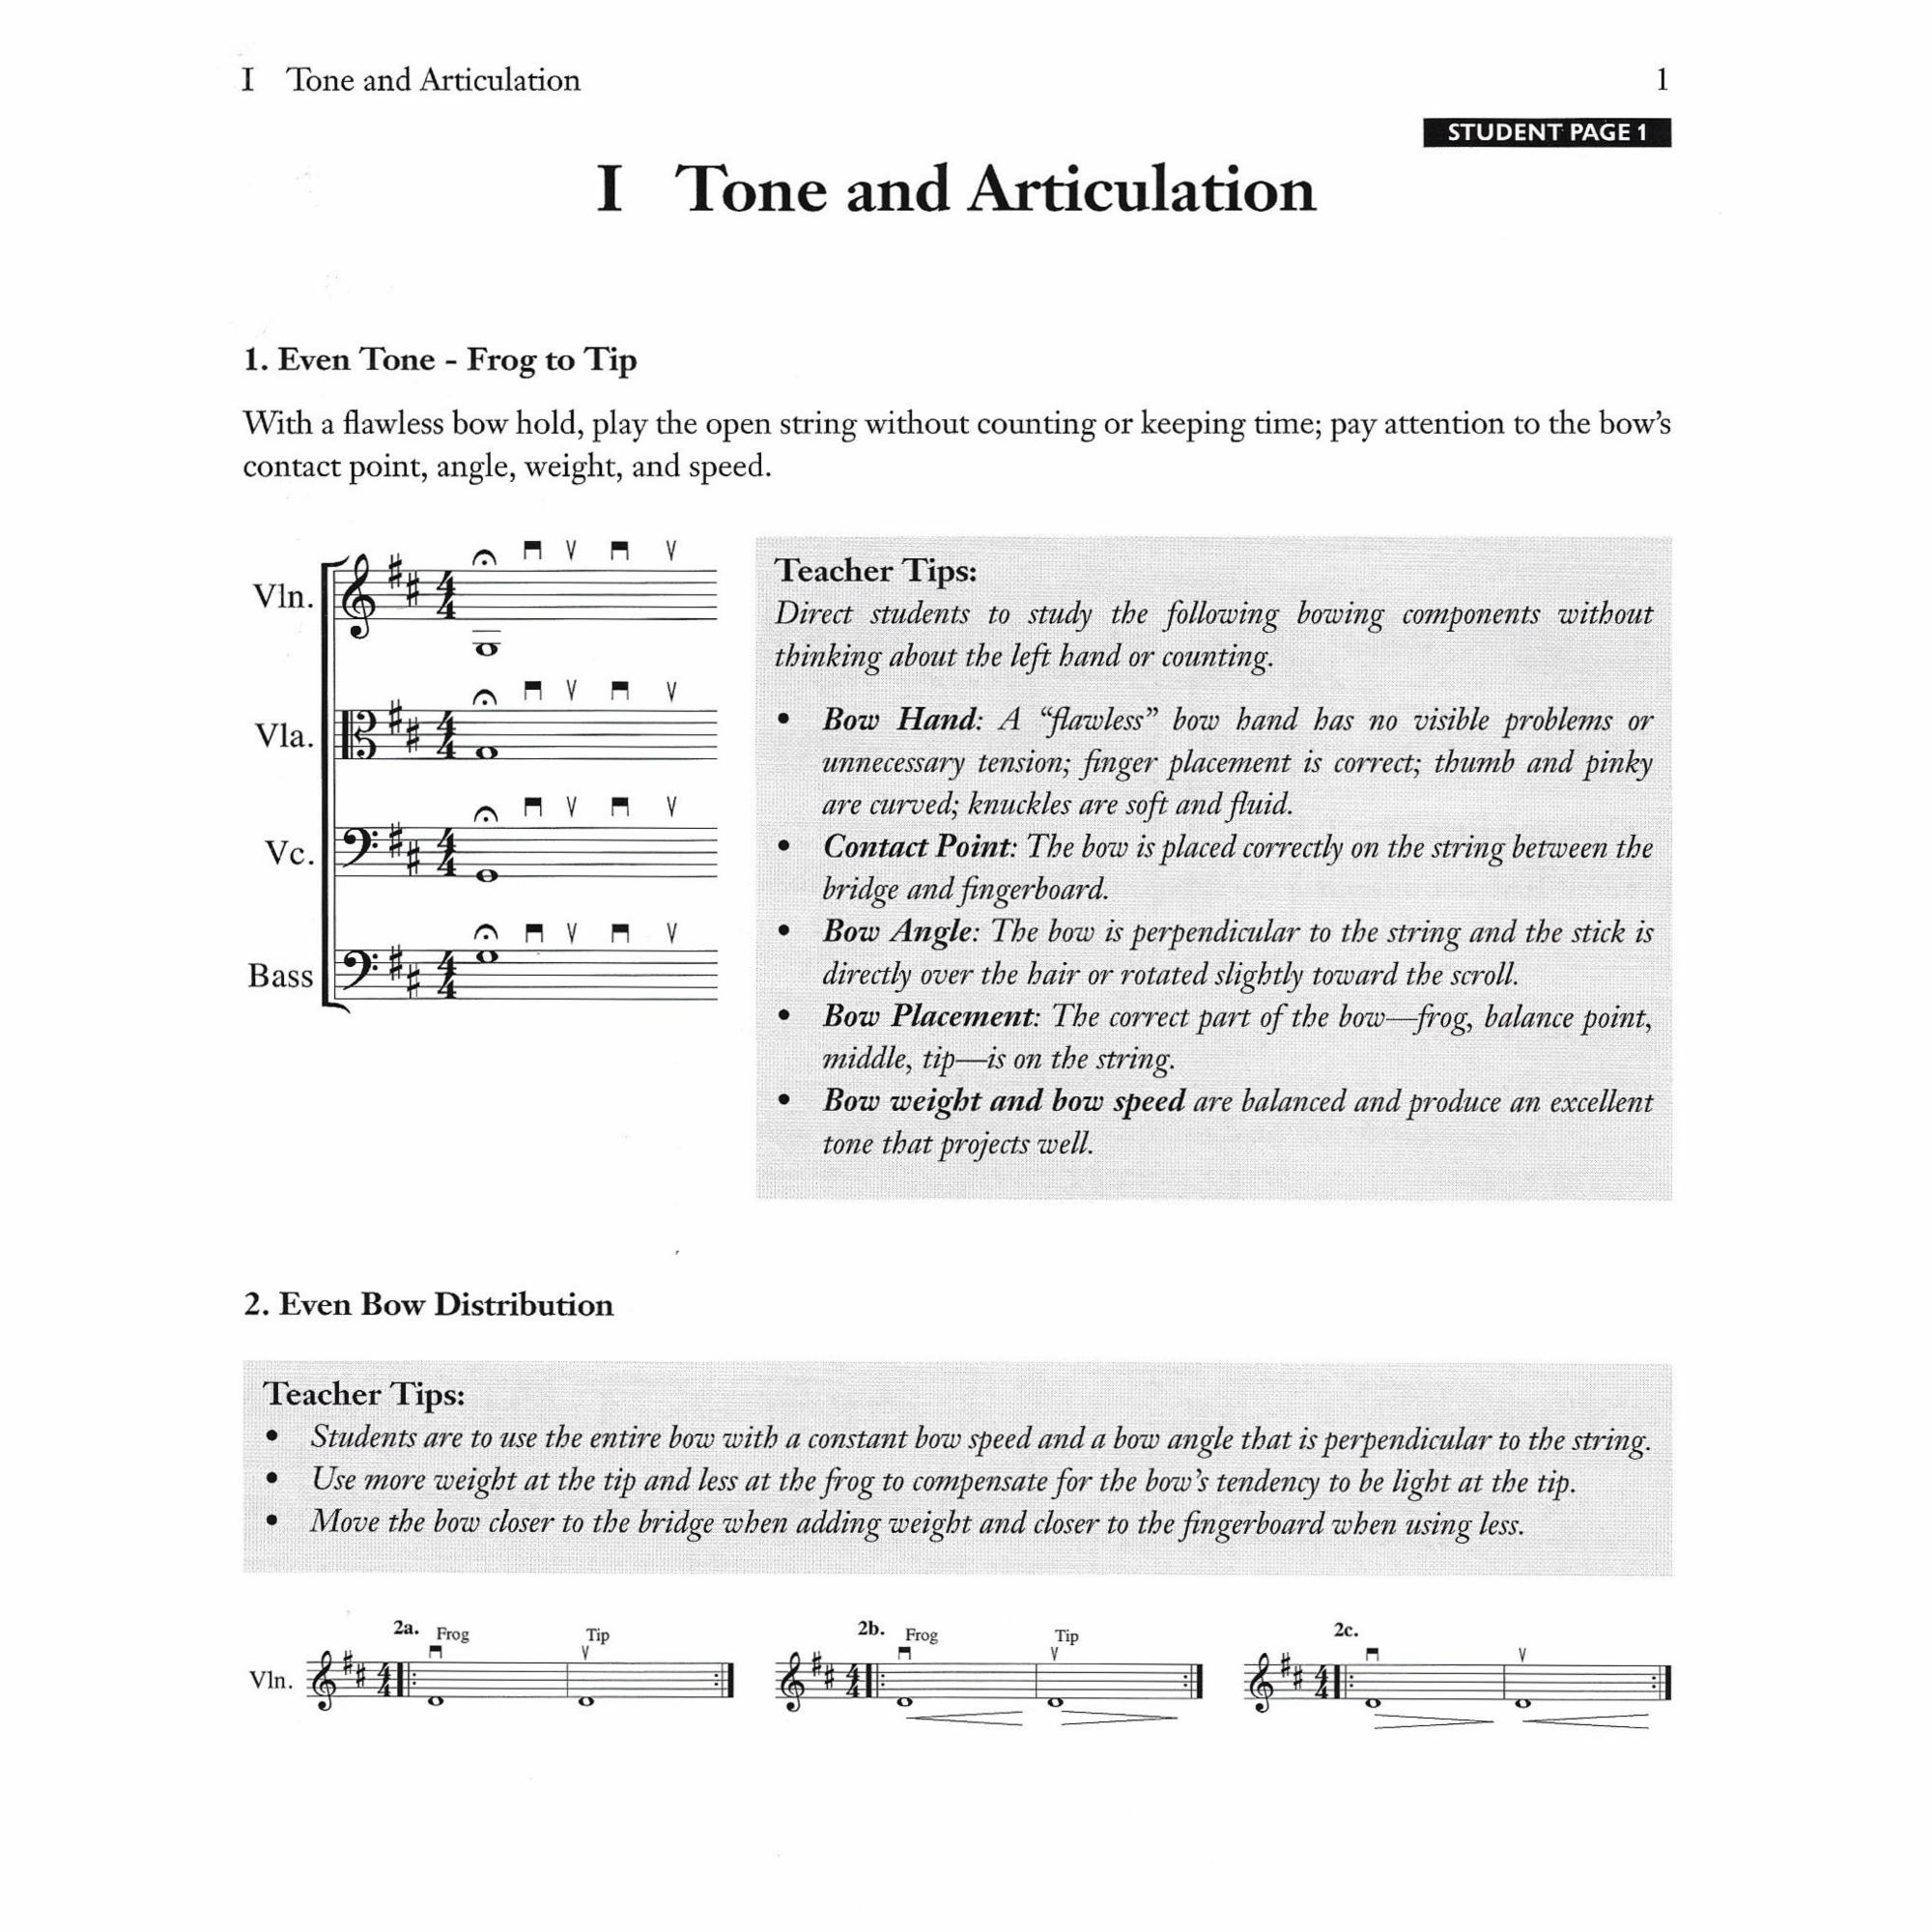 Sample: Conductor's Edition (Pg. 1)